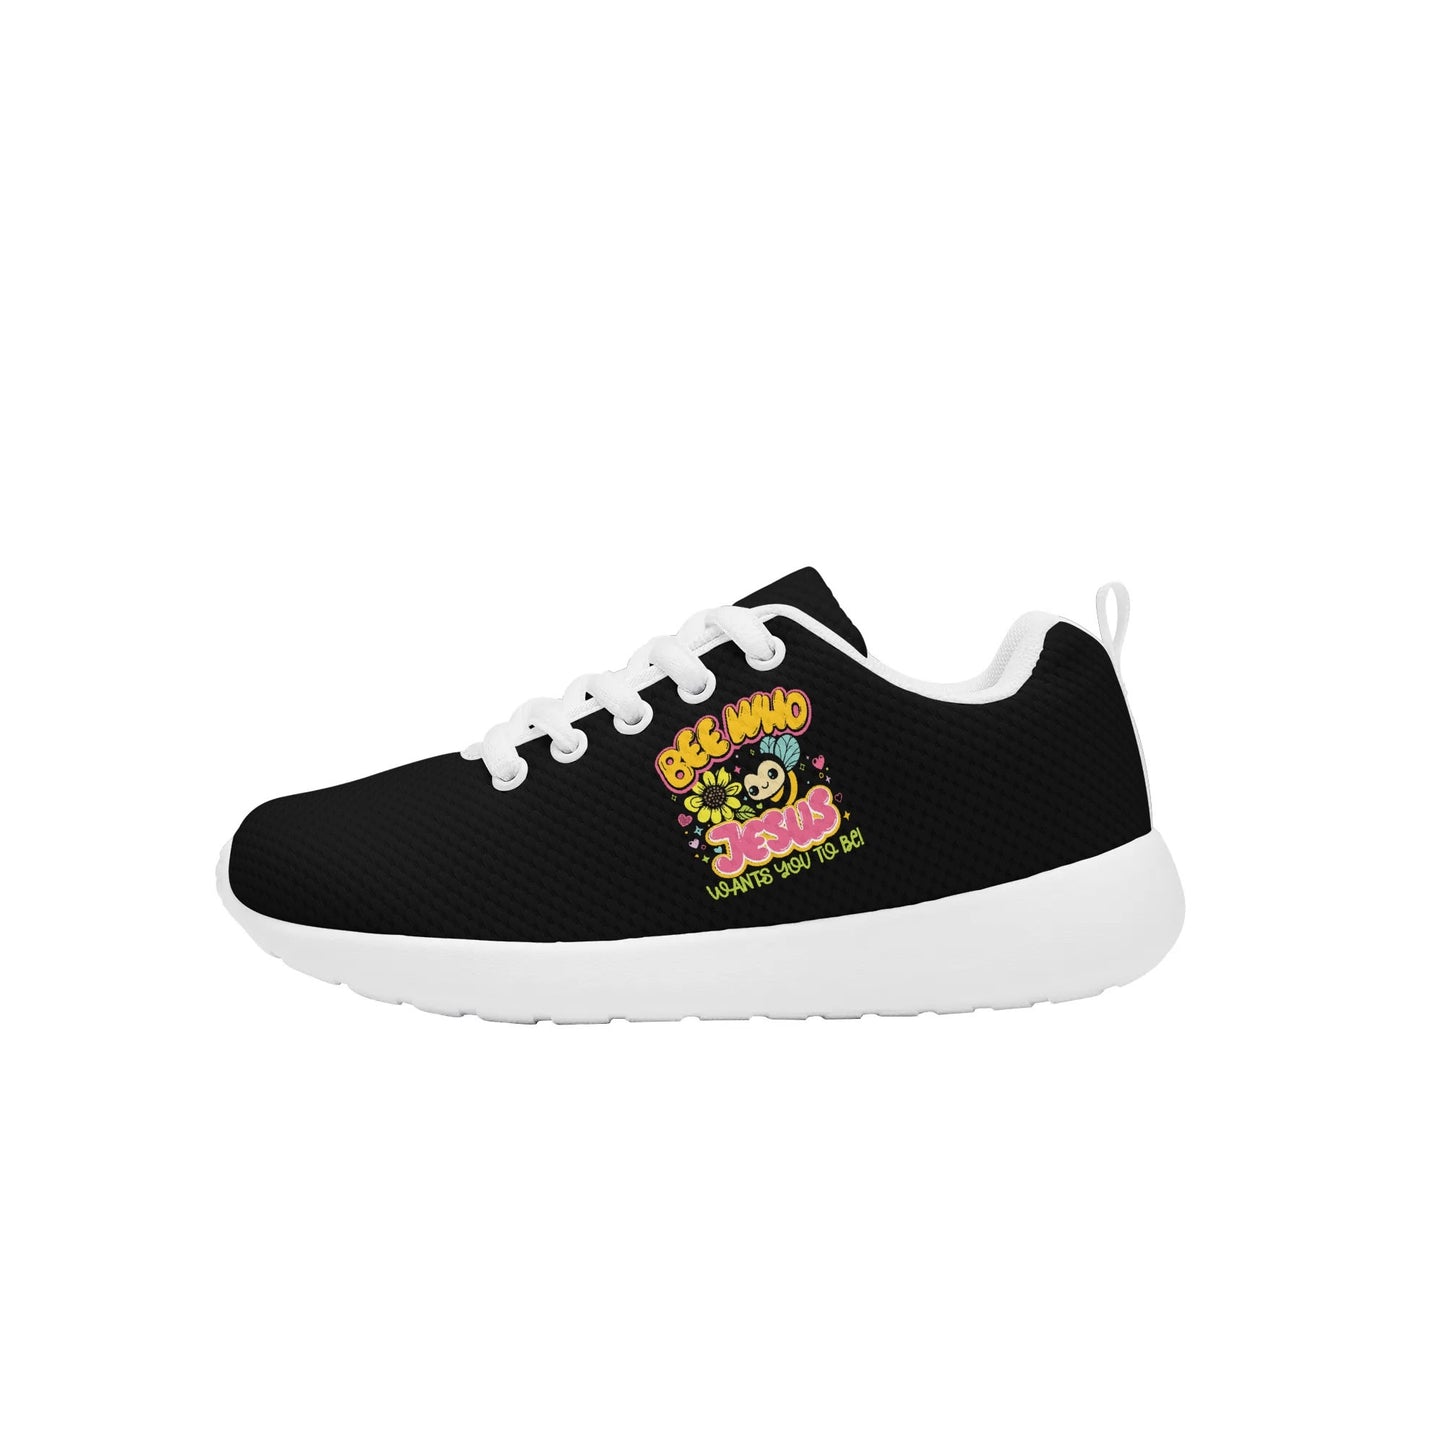 Bee Who Jesus Wants You To Be Kids Lace-up Athletic Christian Sneakers